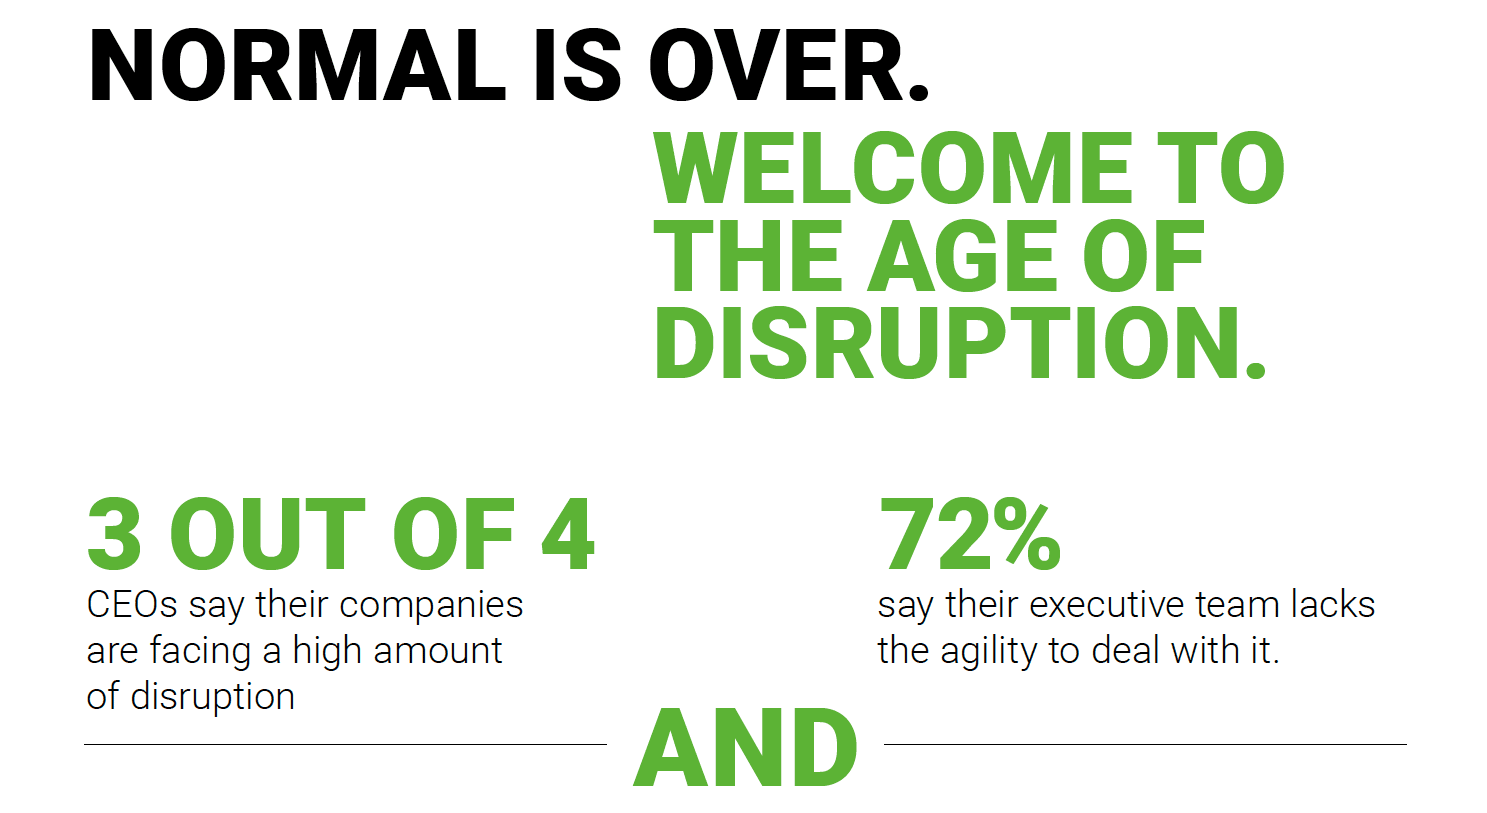 The age of disruption: CEOs say they need to overhaul their business models within three years